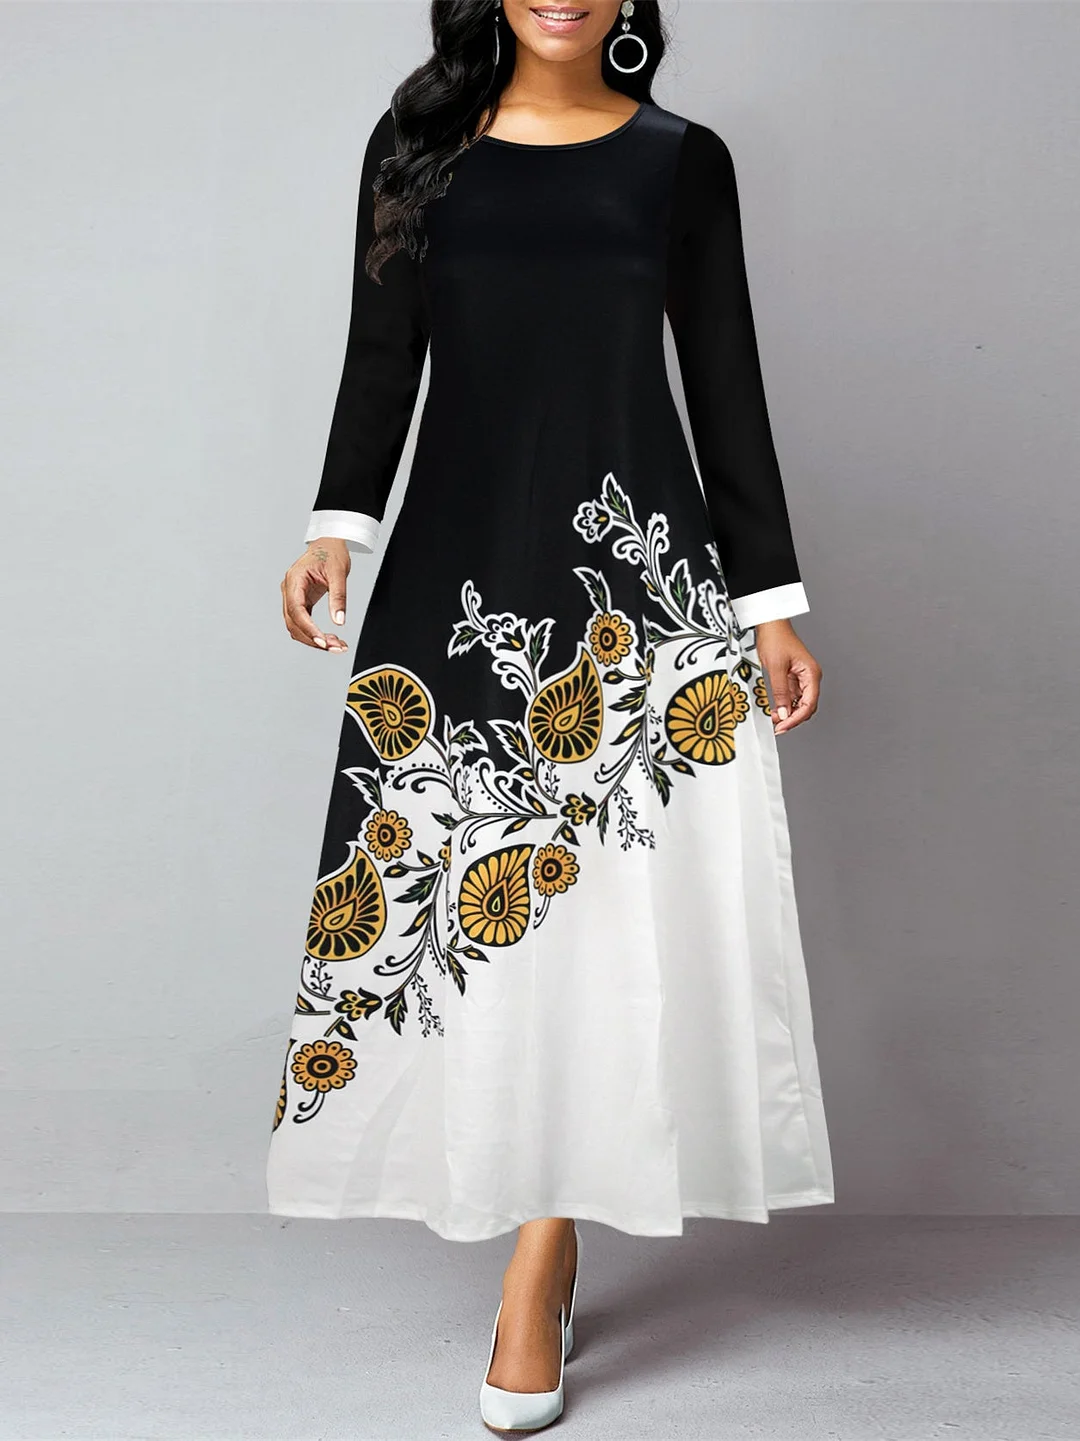 Women's Floral Printed Graphic Stitching Scoop Neck Long Sleeve Dress